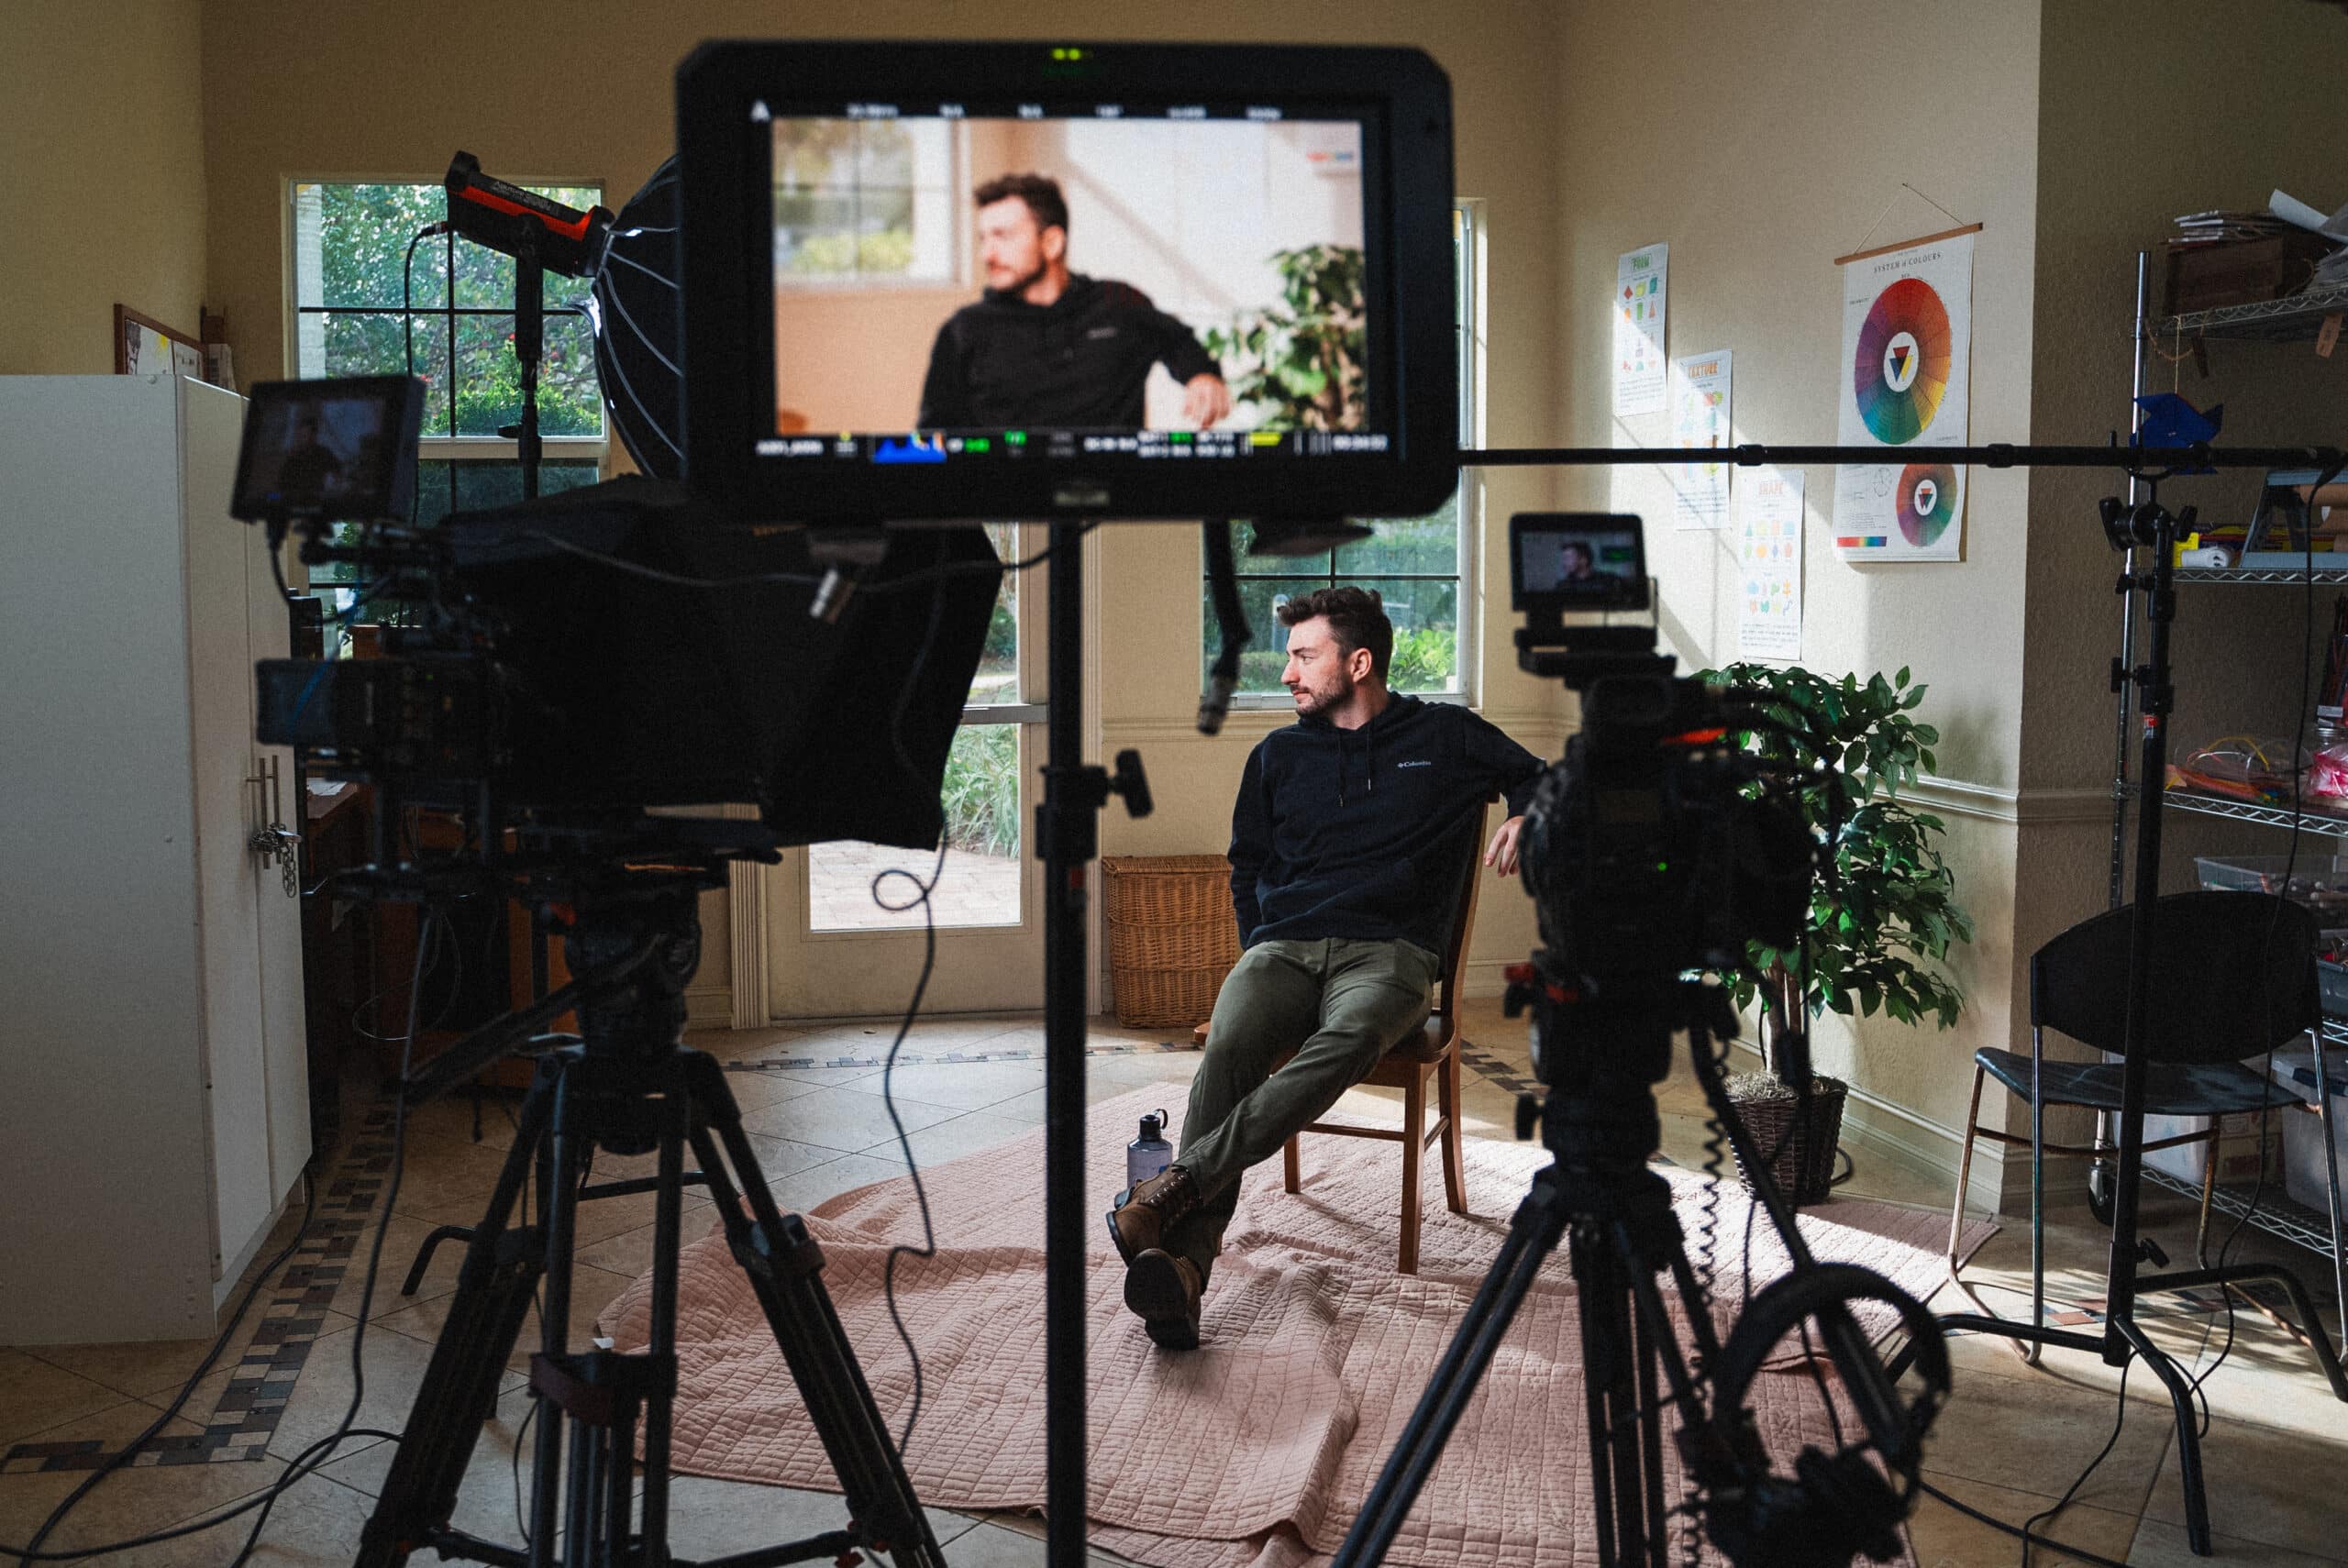 Video equipment capturing someone sitting in a chair for an on-camera interview